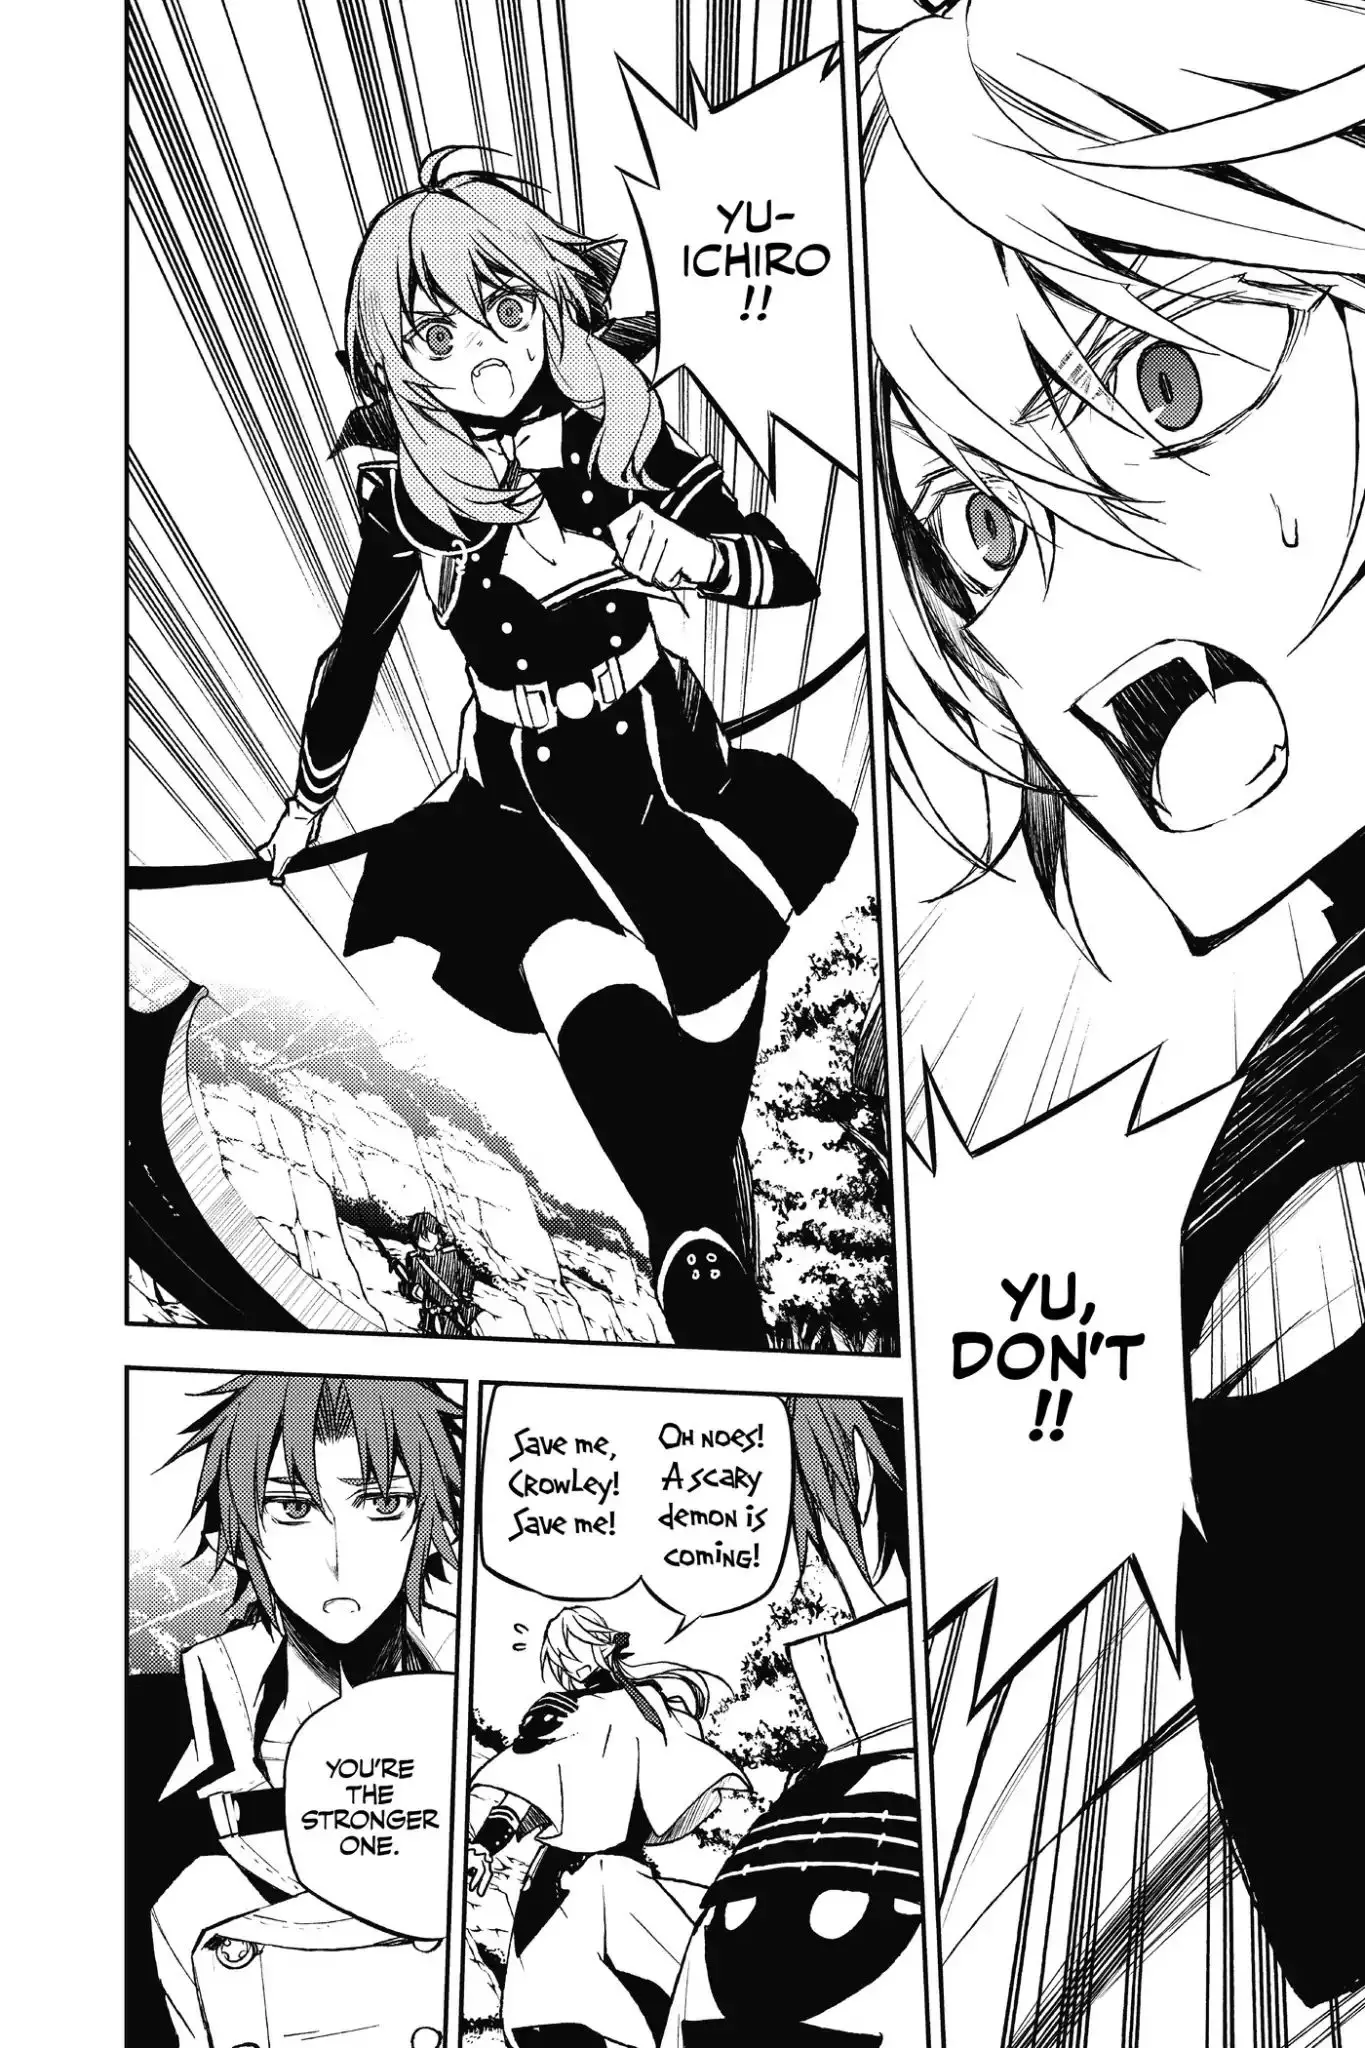 Seraph Of The End - 46 page 3-5877cb6a